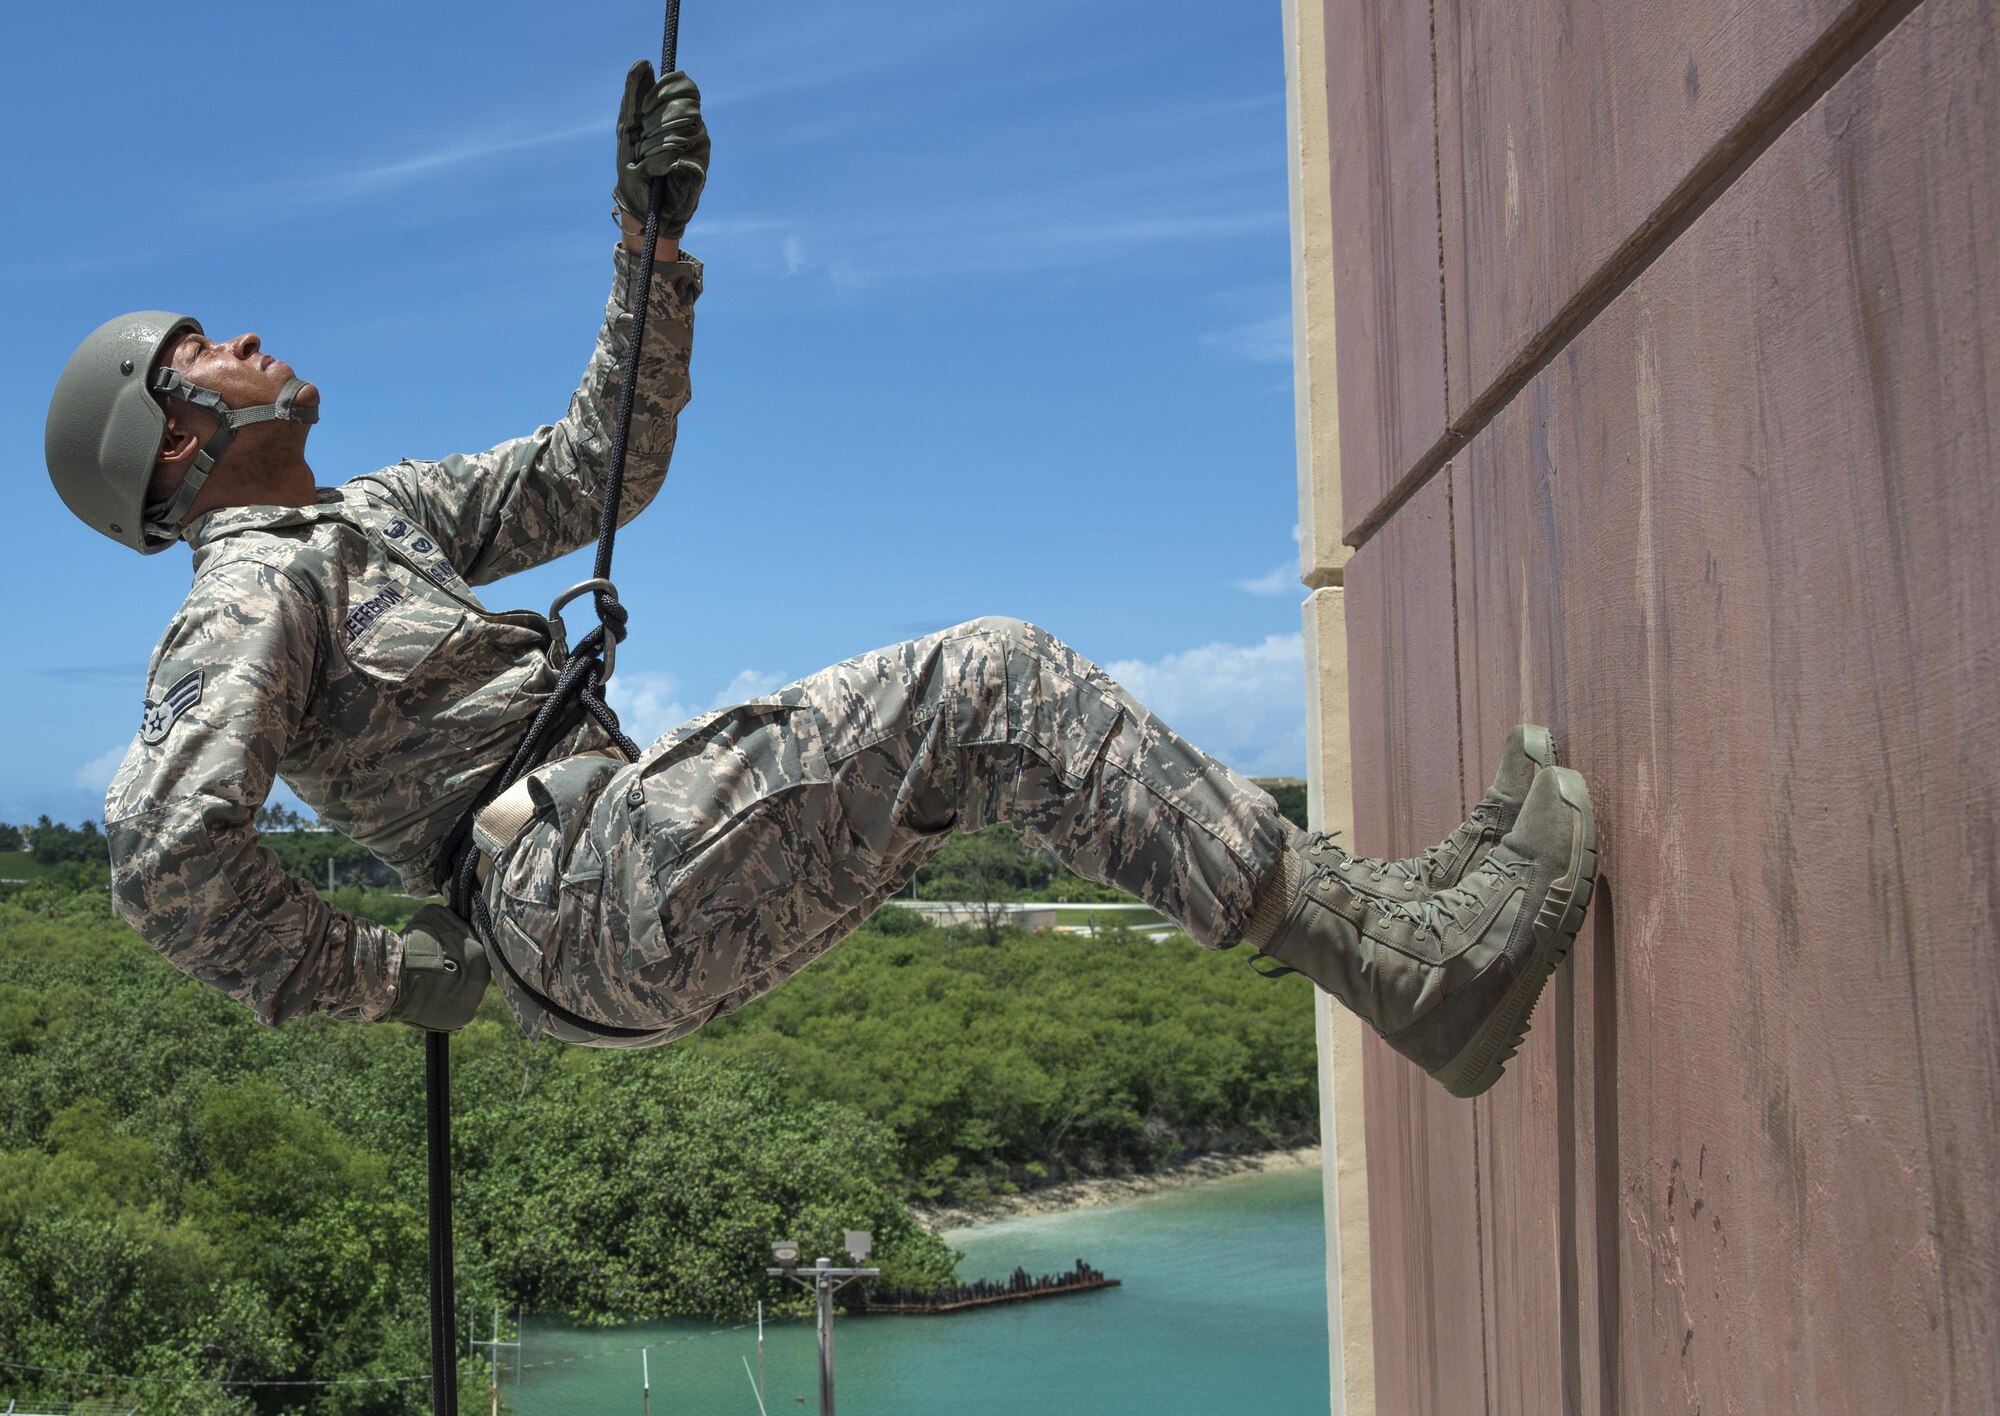 Senior Airman Brandon Jefferson, 554th RED HORSE Squadron operations control, awaits instruction while rappelling down a 90-foot tower Aug. 9, 2016, at Naval Base Guam. The purpose of the rappel training was to provide real-world training for 554th RHS members. RED HORSE units provide a highly responsive force to support contingency, peacetime and humanitarian operations world-wide. (U.S. Air Force photo by Master Sgt. JT May III)